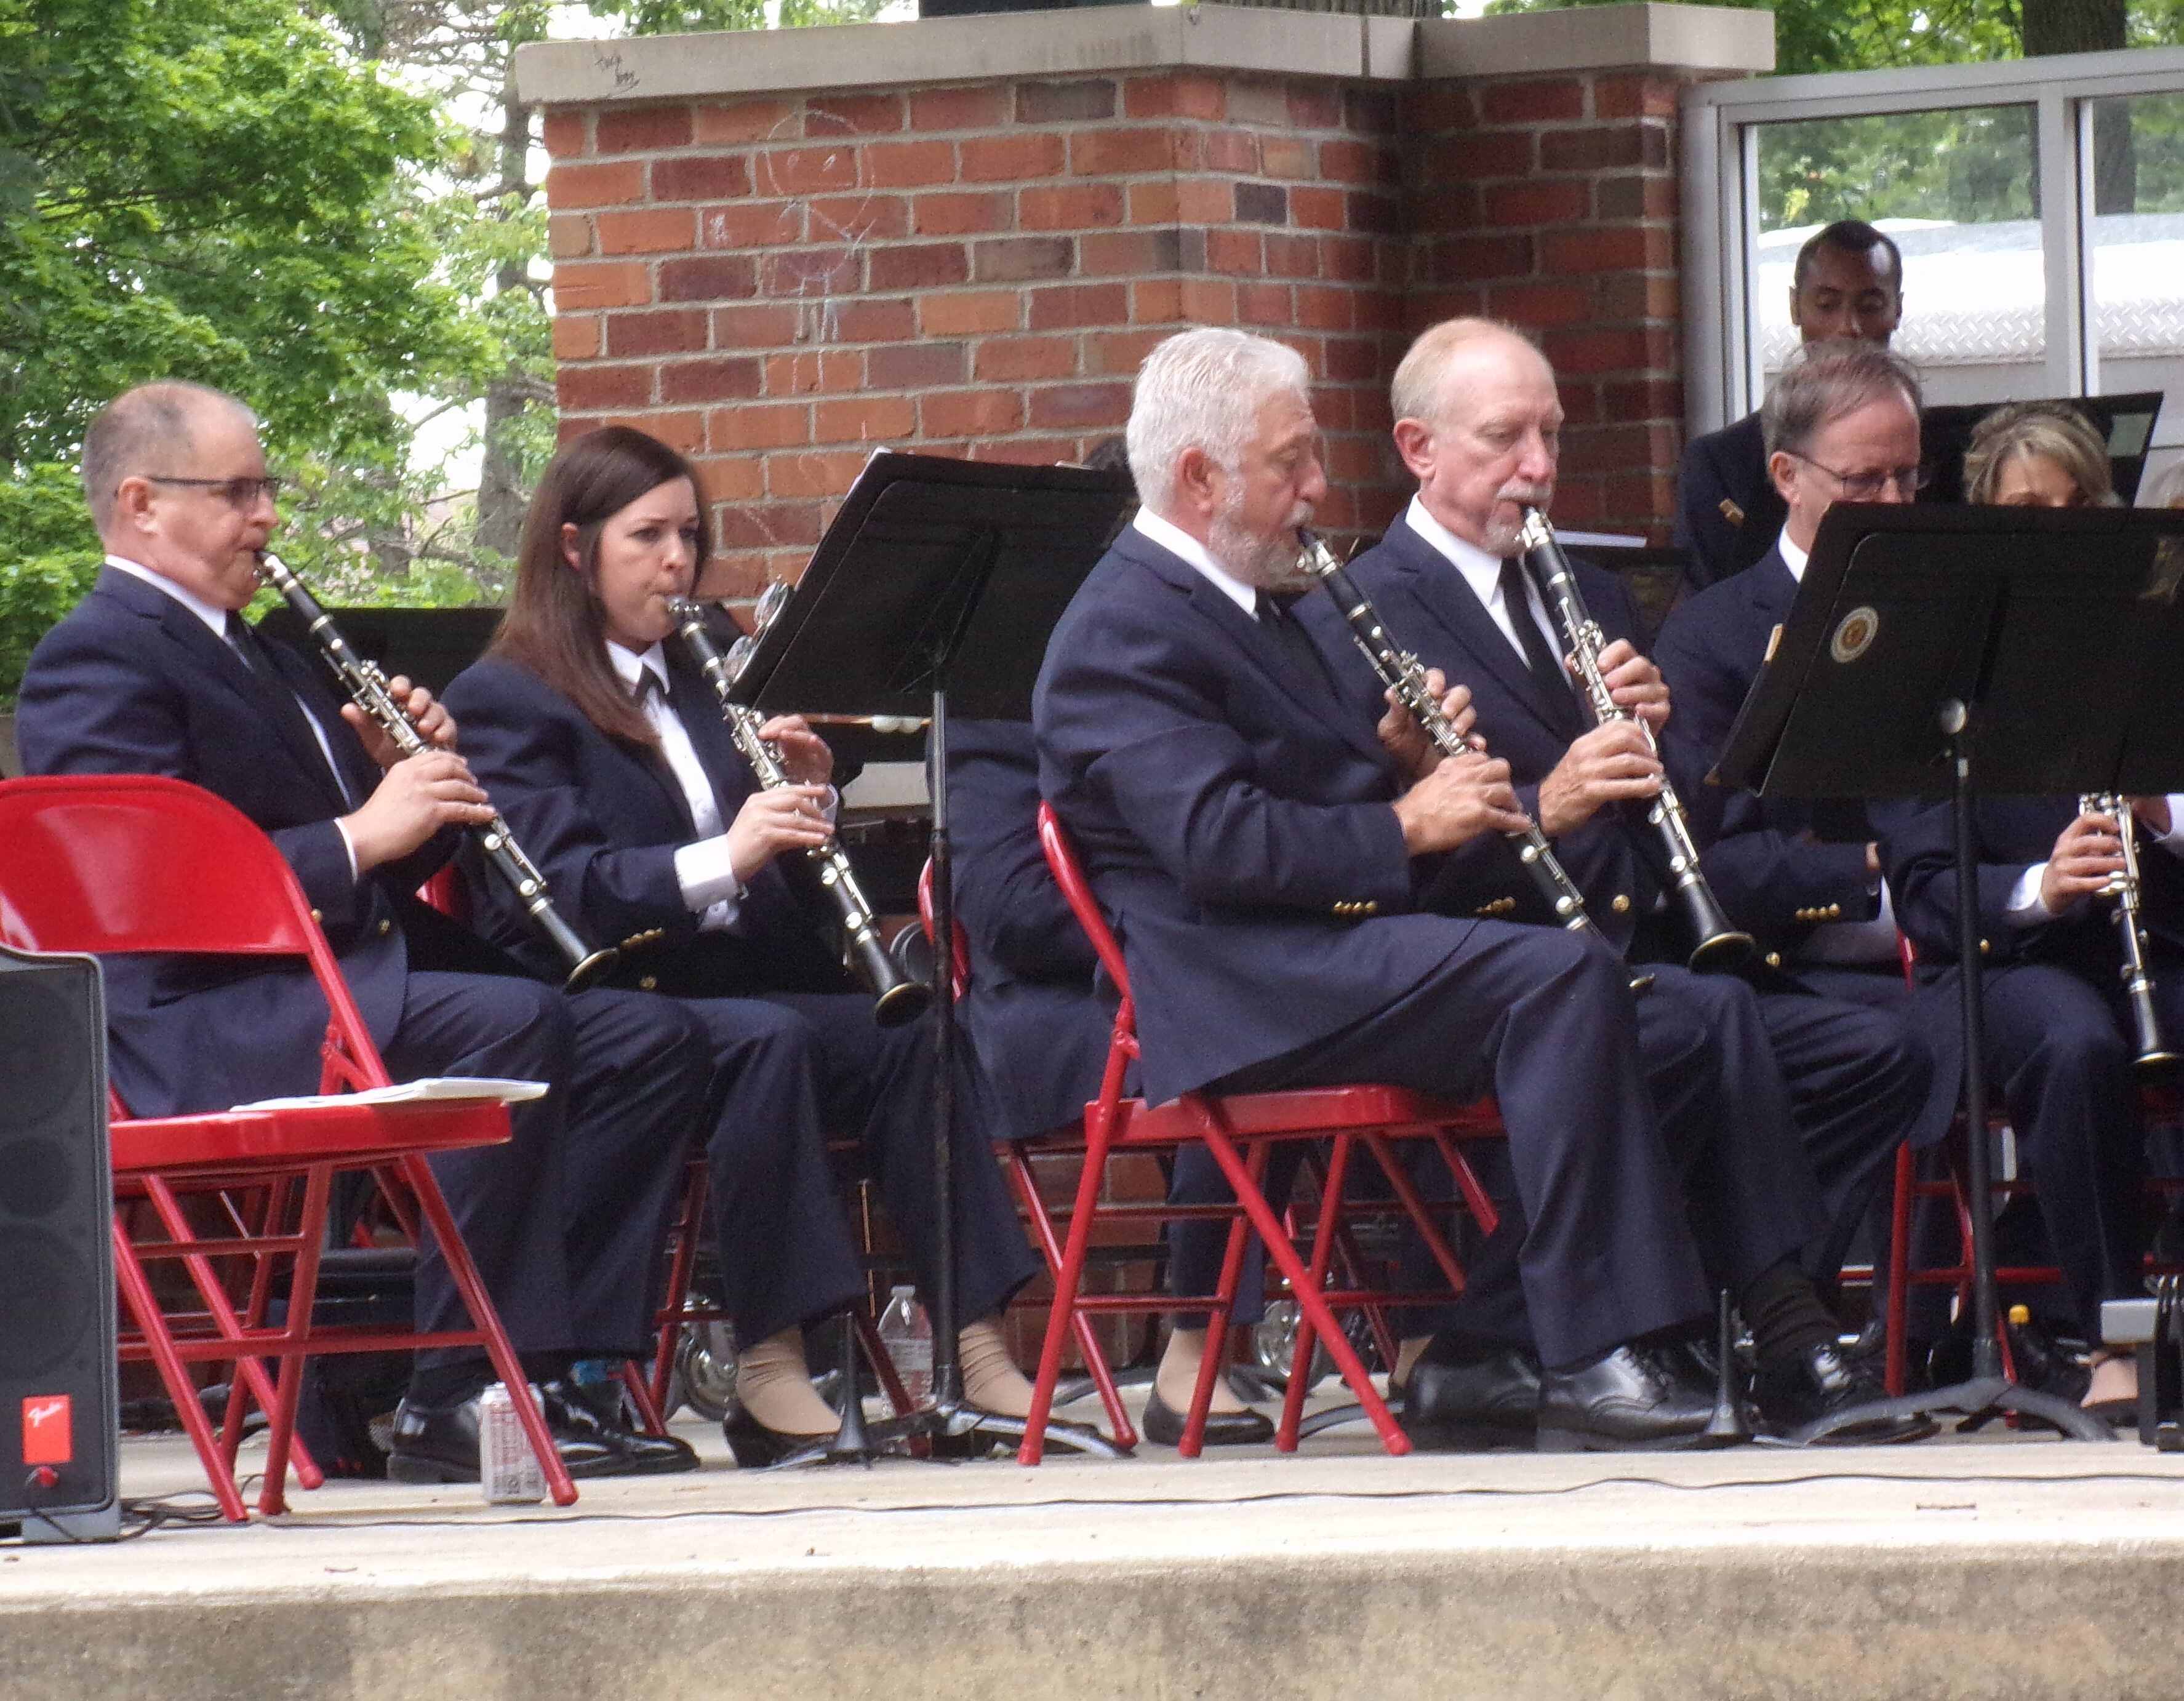 The Joliet American Legion Band performed in June of 2022 at the Plumb Pavilion in Streator's City Park.